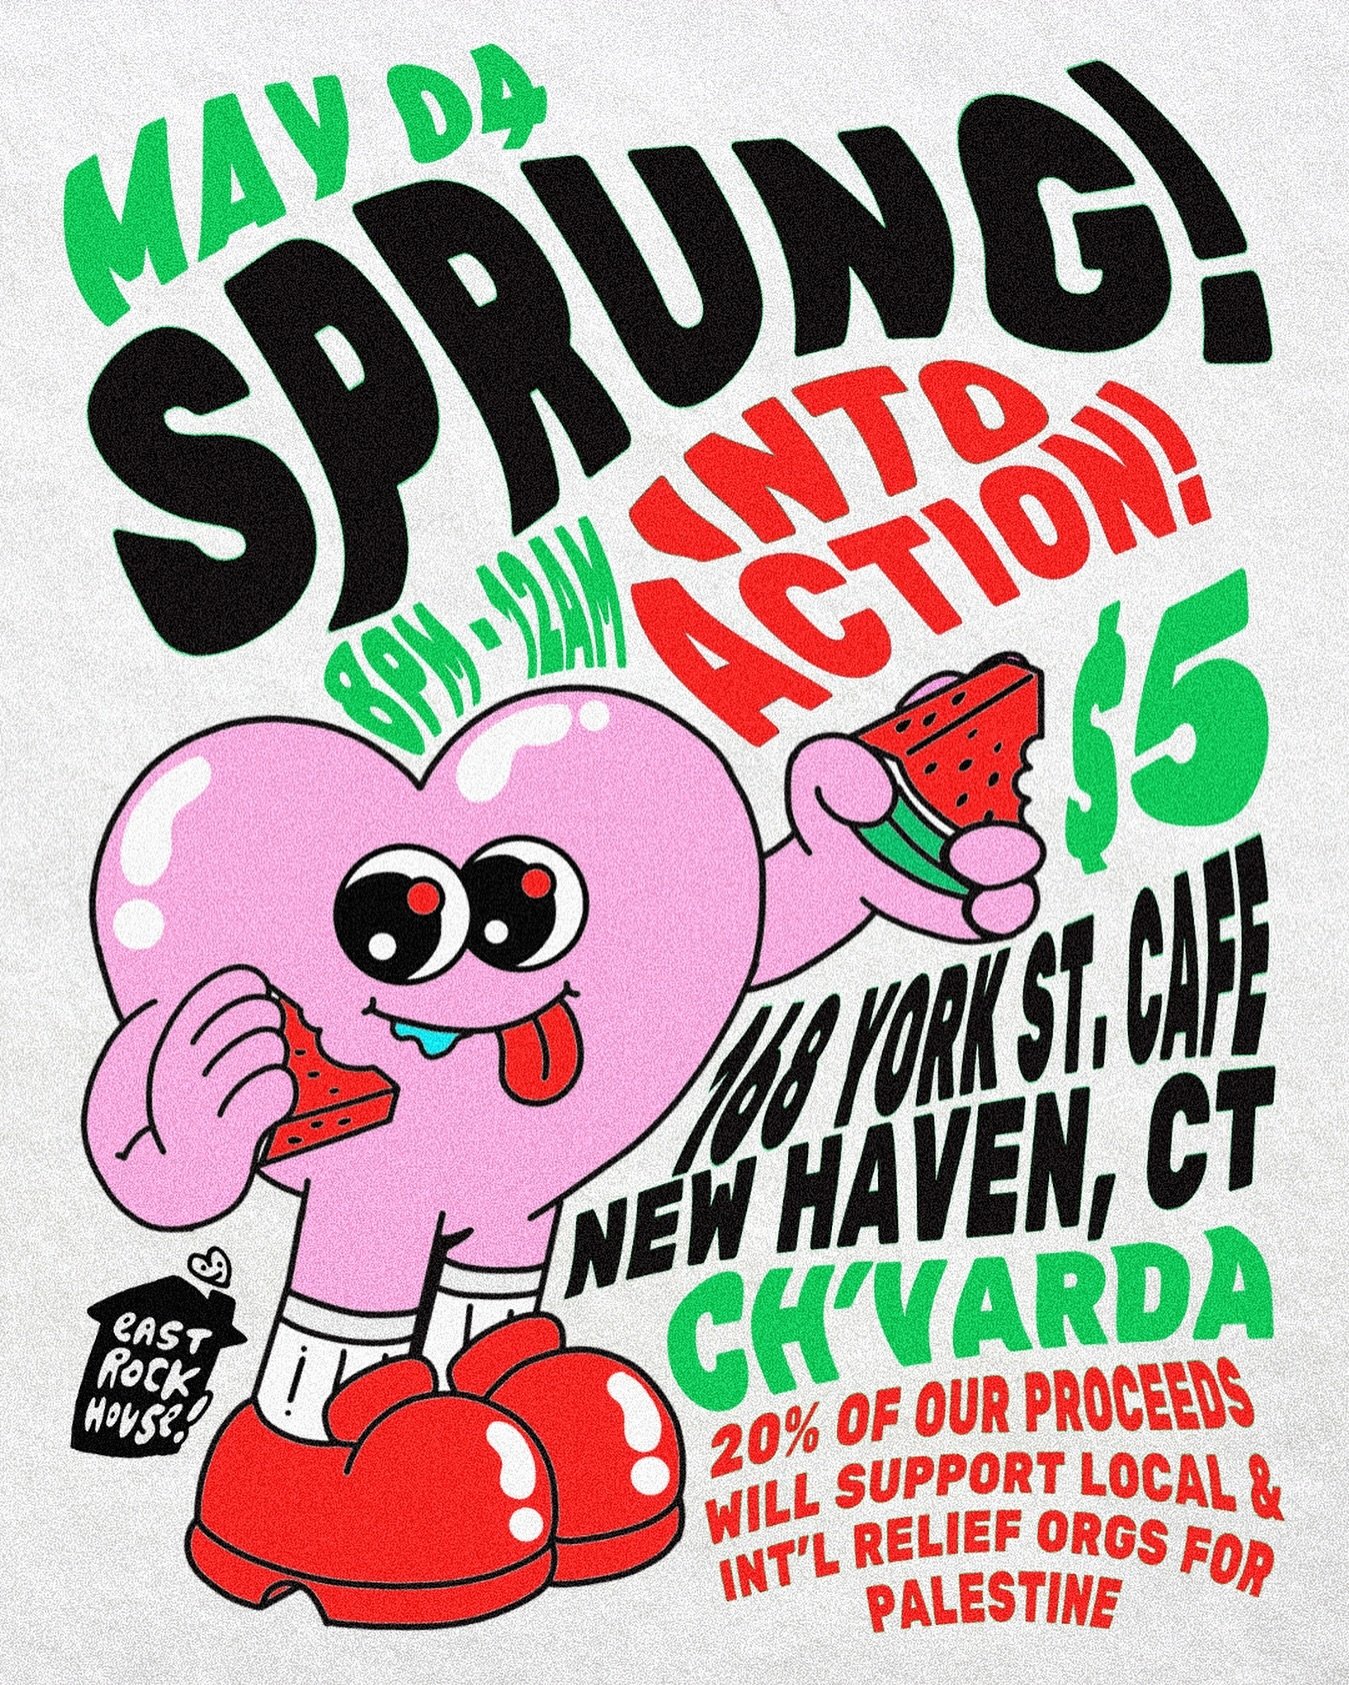 SPRUNG! into Action! Because this isn&rsquo;t a time for business as usual, period. &bull; Come out this Saturday, 5/4 from 8pm-12am for a fun respite &amp; recharge with your favorite gays! &bull; @ch_varda spinning OF COURSE &amp; we&rsquo;ll have 